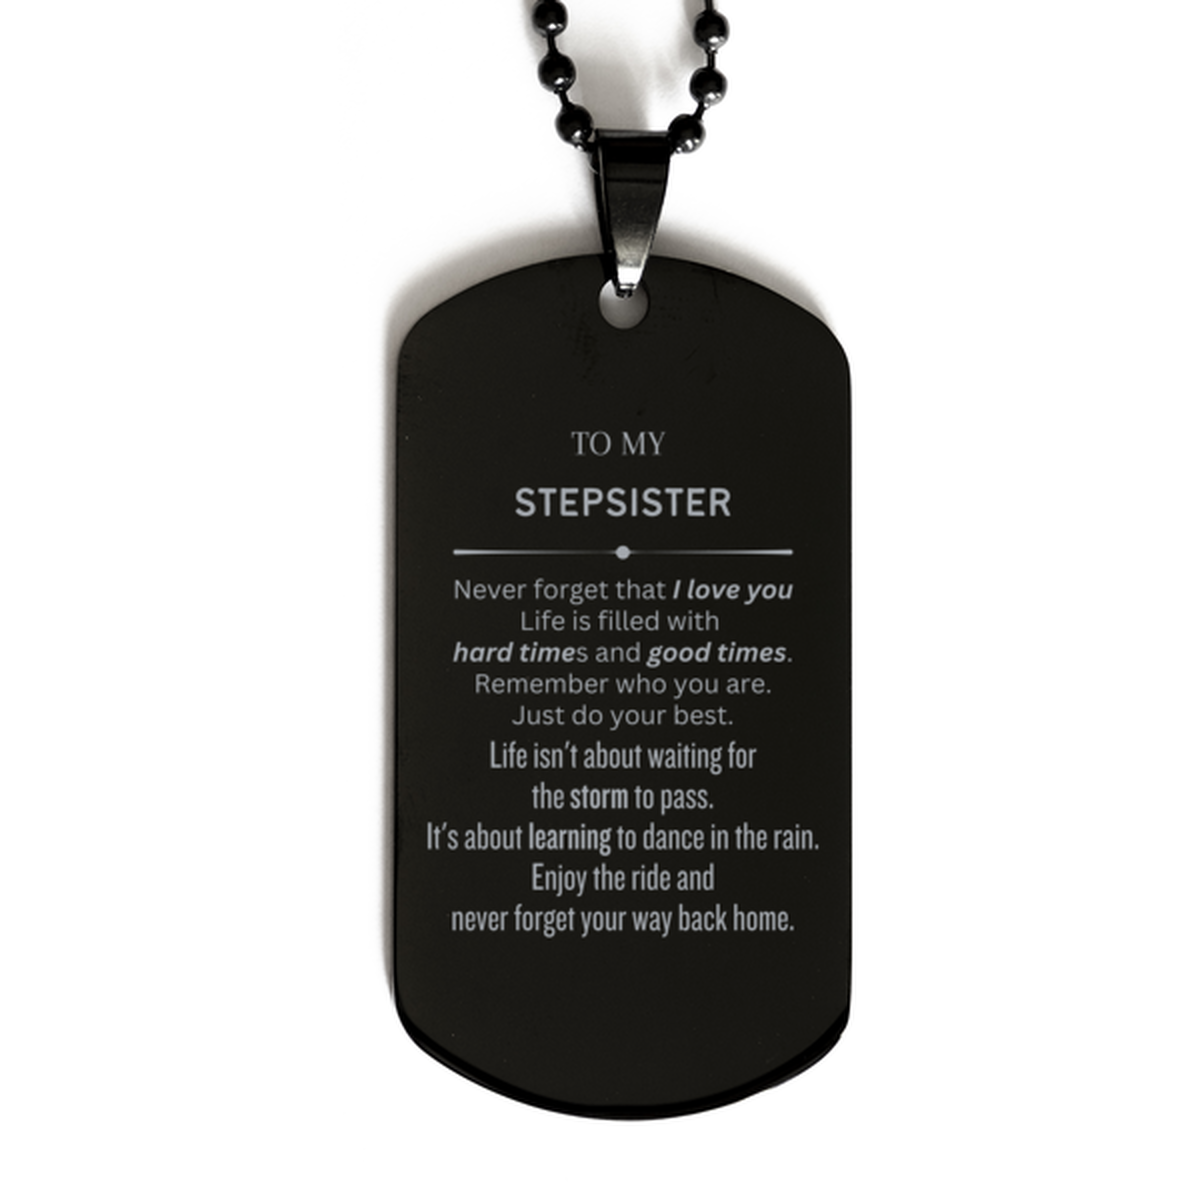 Christmas Stepsister Black Dog Tag Gifts, To My Stepsister Birthday Thank You Gifts For Stepsister, Graduation Unique Gifts For Stepsister To My Stepsister Never forget that I love you life is filled with hard times and good times. Remember who you are. J